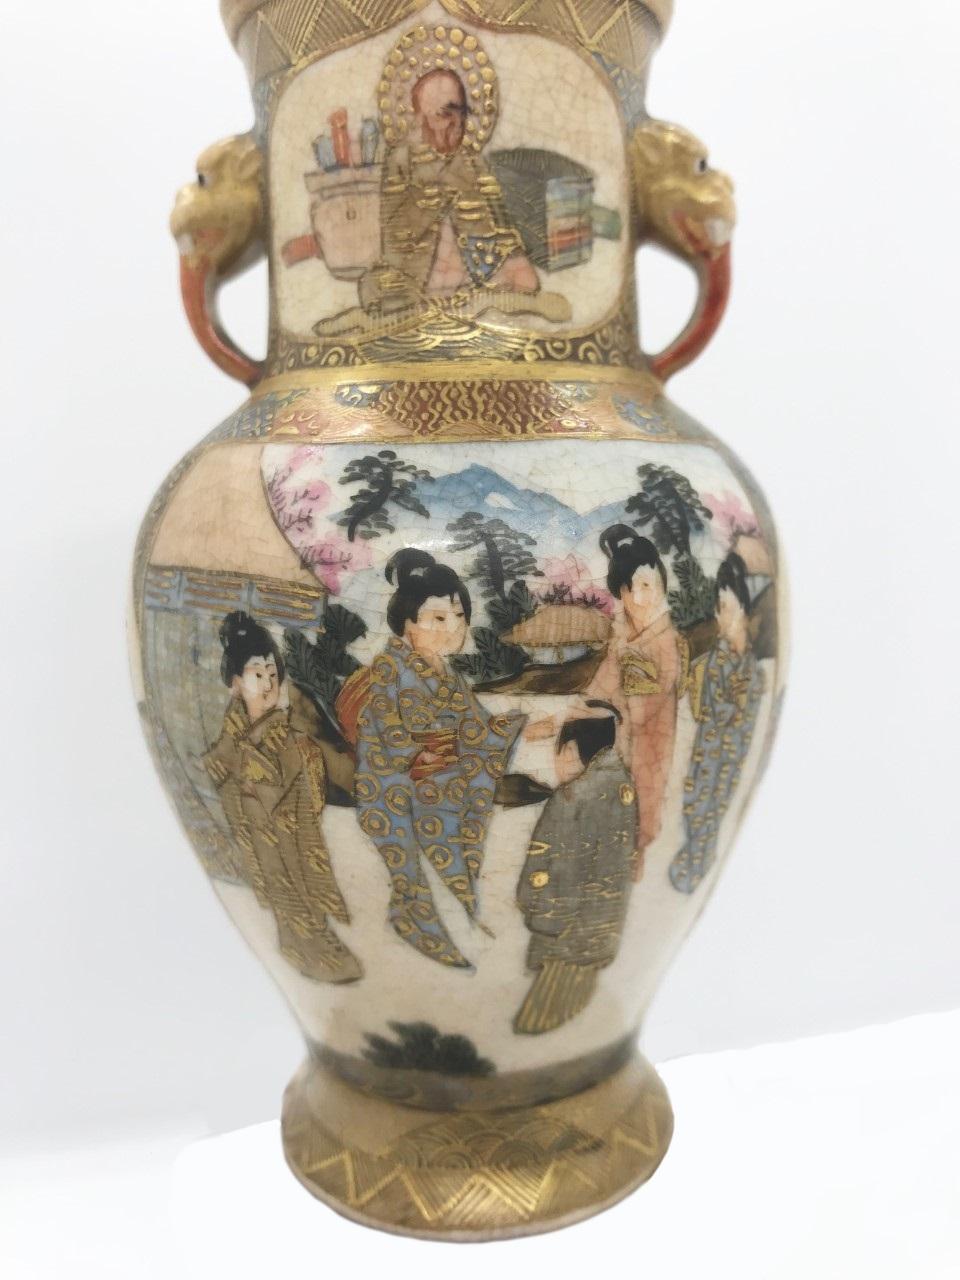 This is an exquisite miniature Japanese Satsuma vase from the Meiji period (1868-1911). It is superbly decorated with various shaped figures in cartouches in front and on the reverse on a brocade patterned base. Two Foo dog handles are applied. It